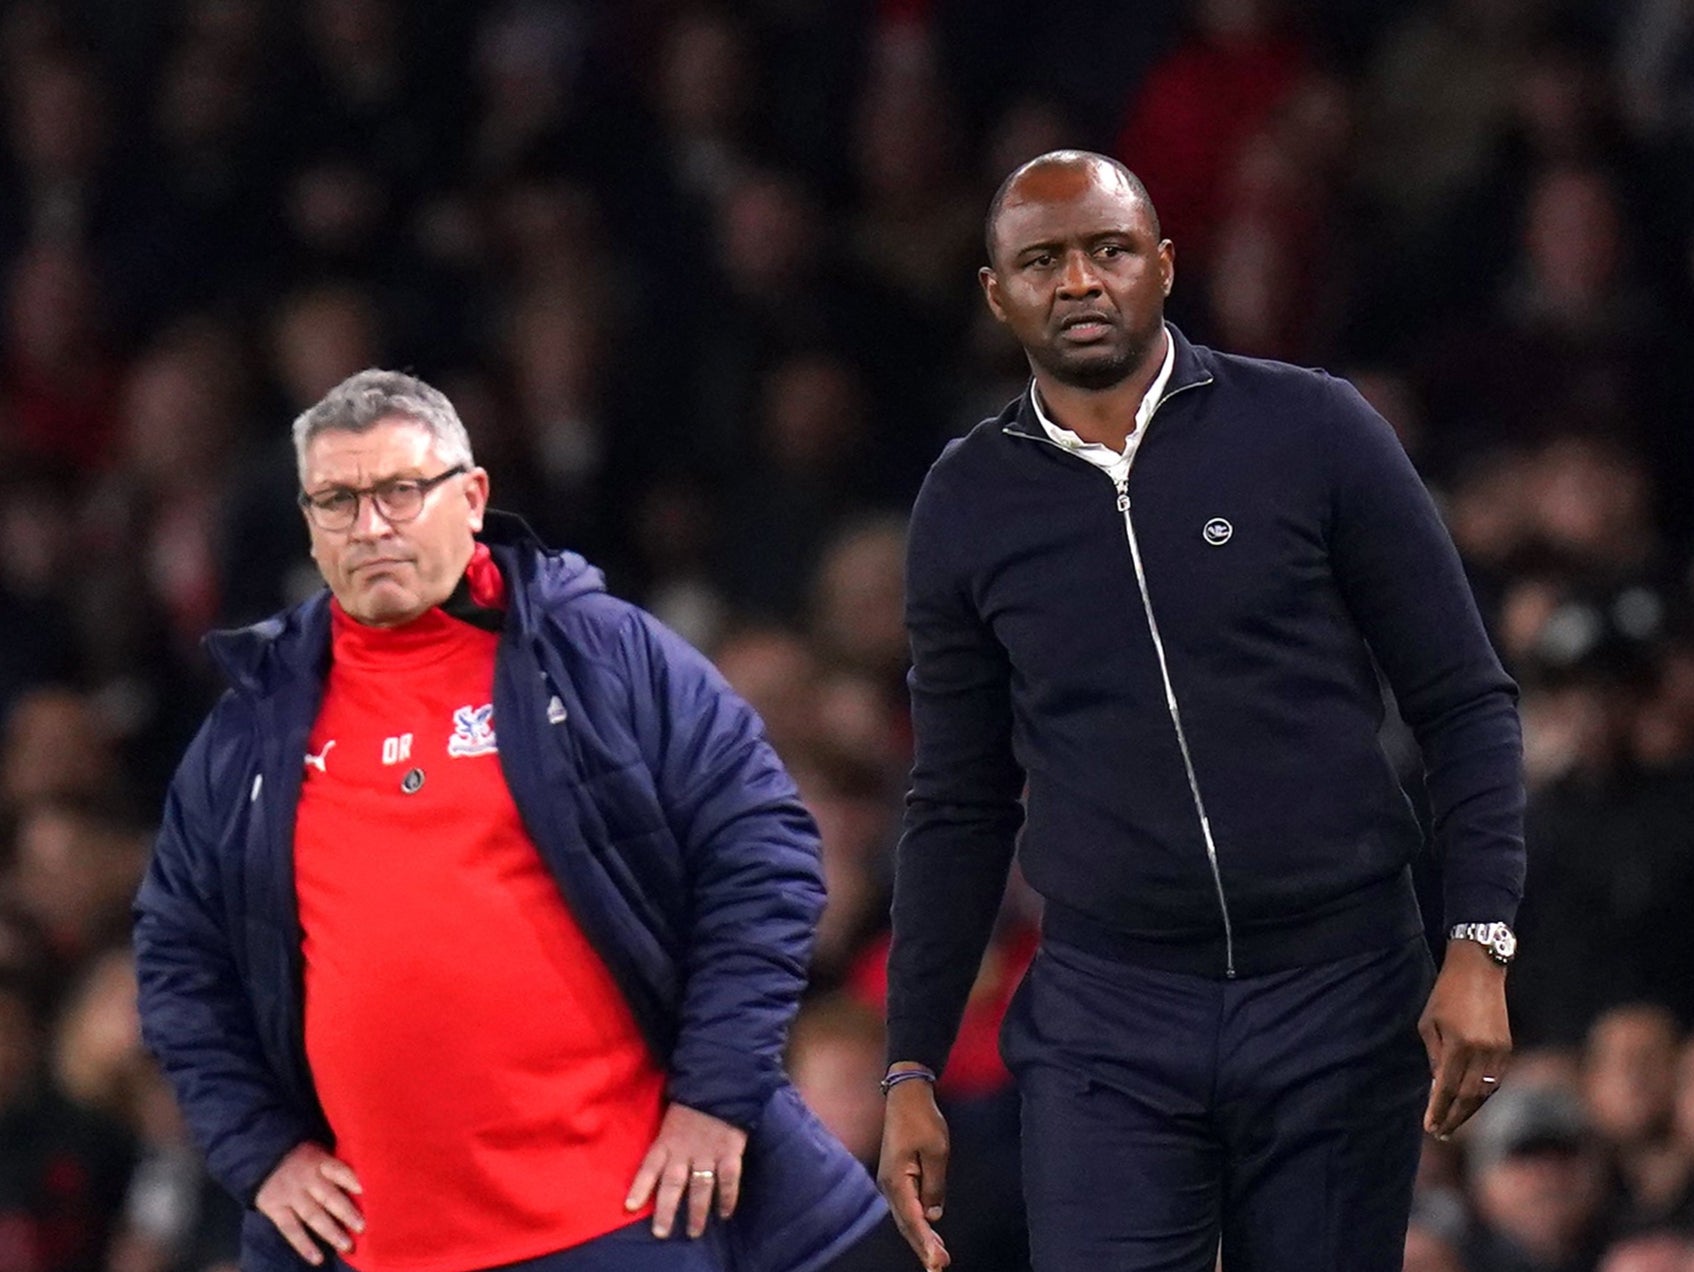 Crystal Palace manager Patrick Vieira knows the Newcastle players will want to show the new owners they can be part of the club’s new project (Adam Davy/PA)